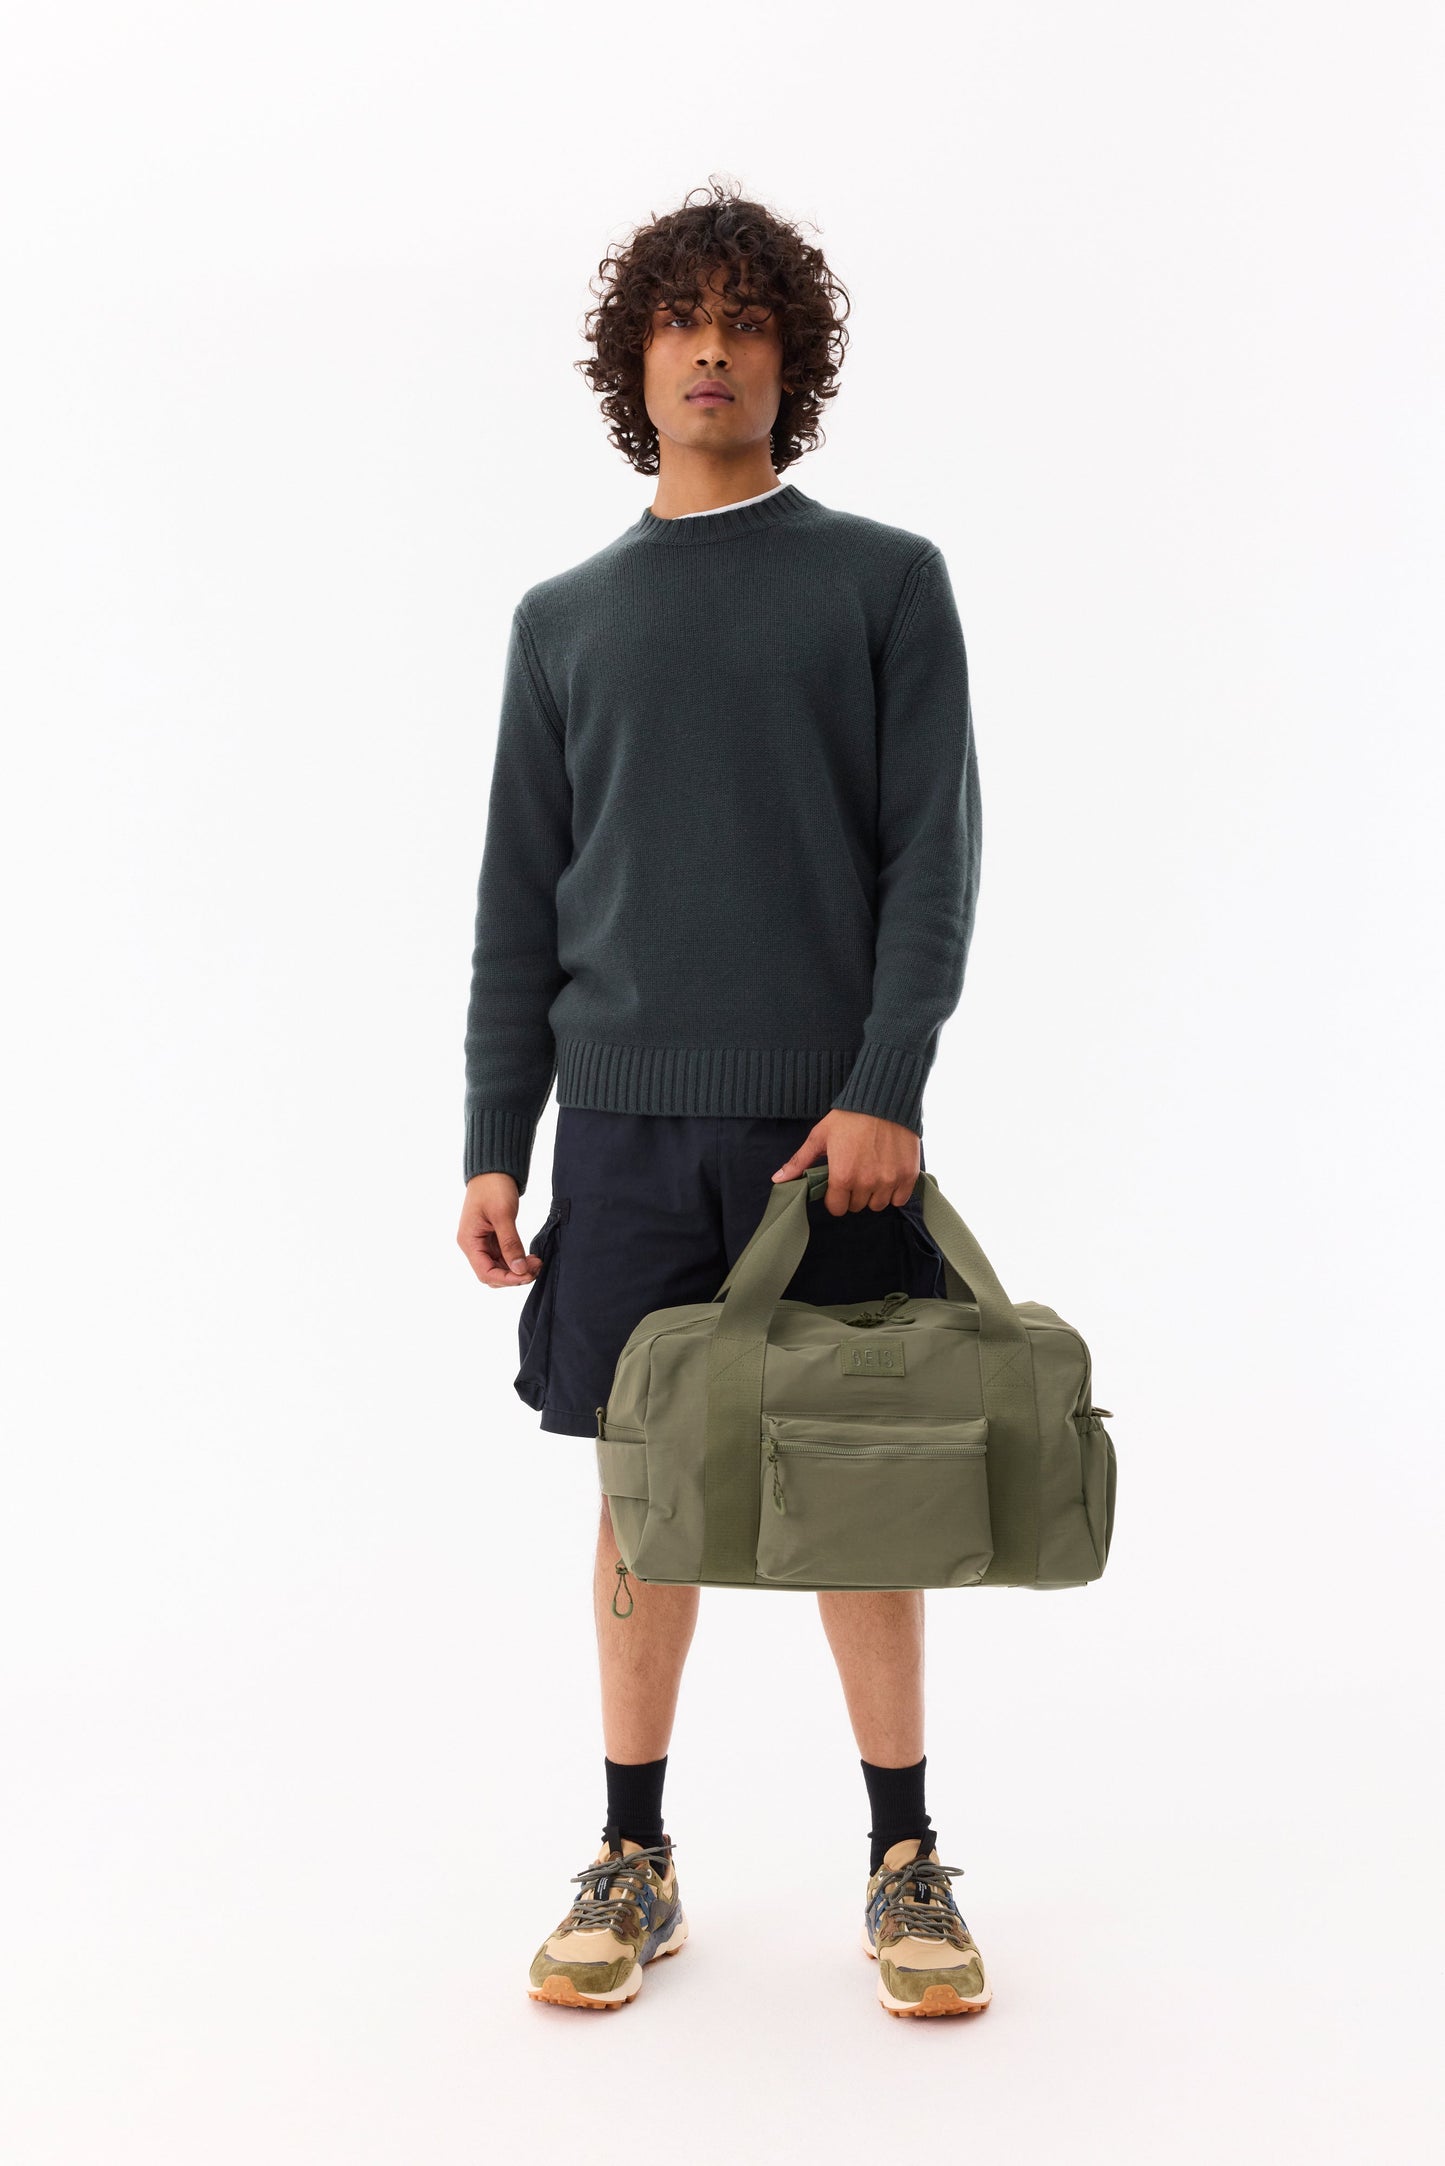 The Sport Duffle in Olive